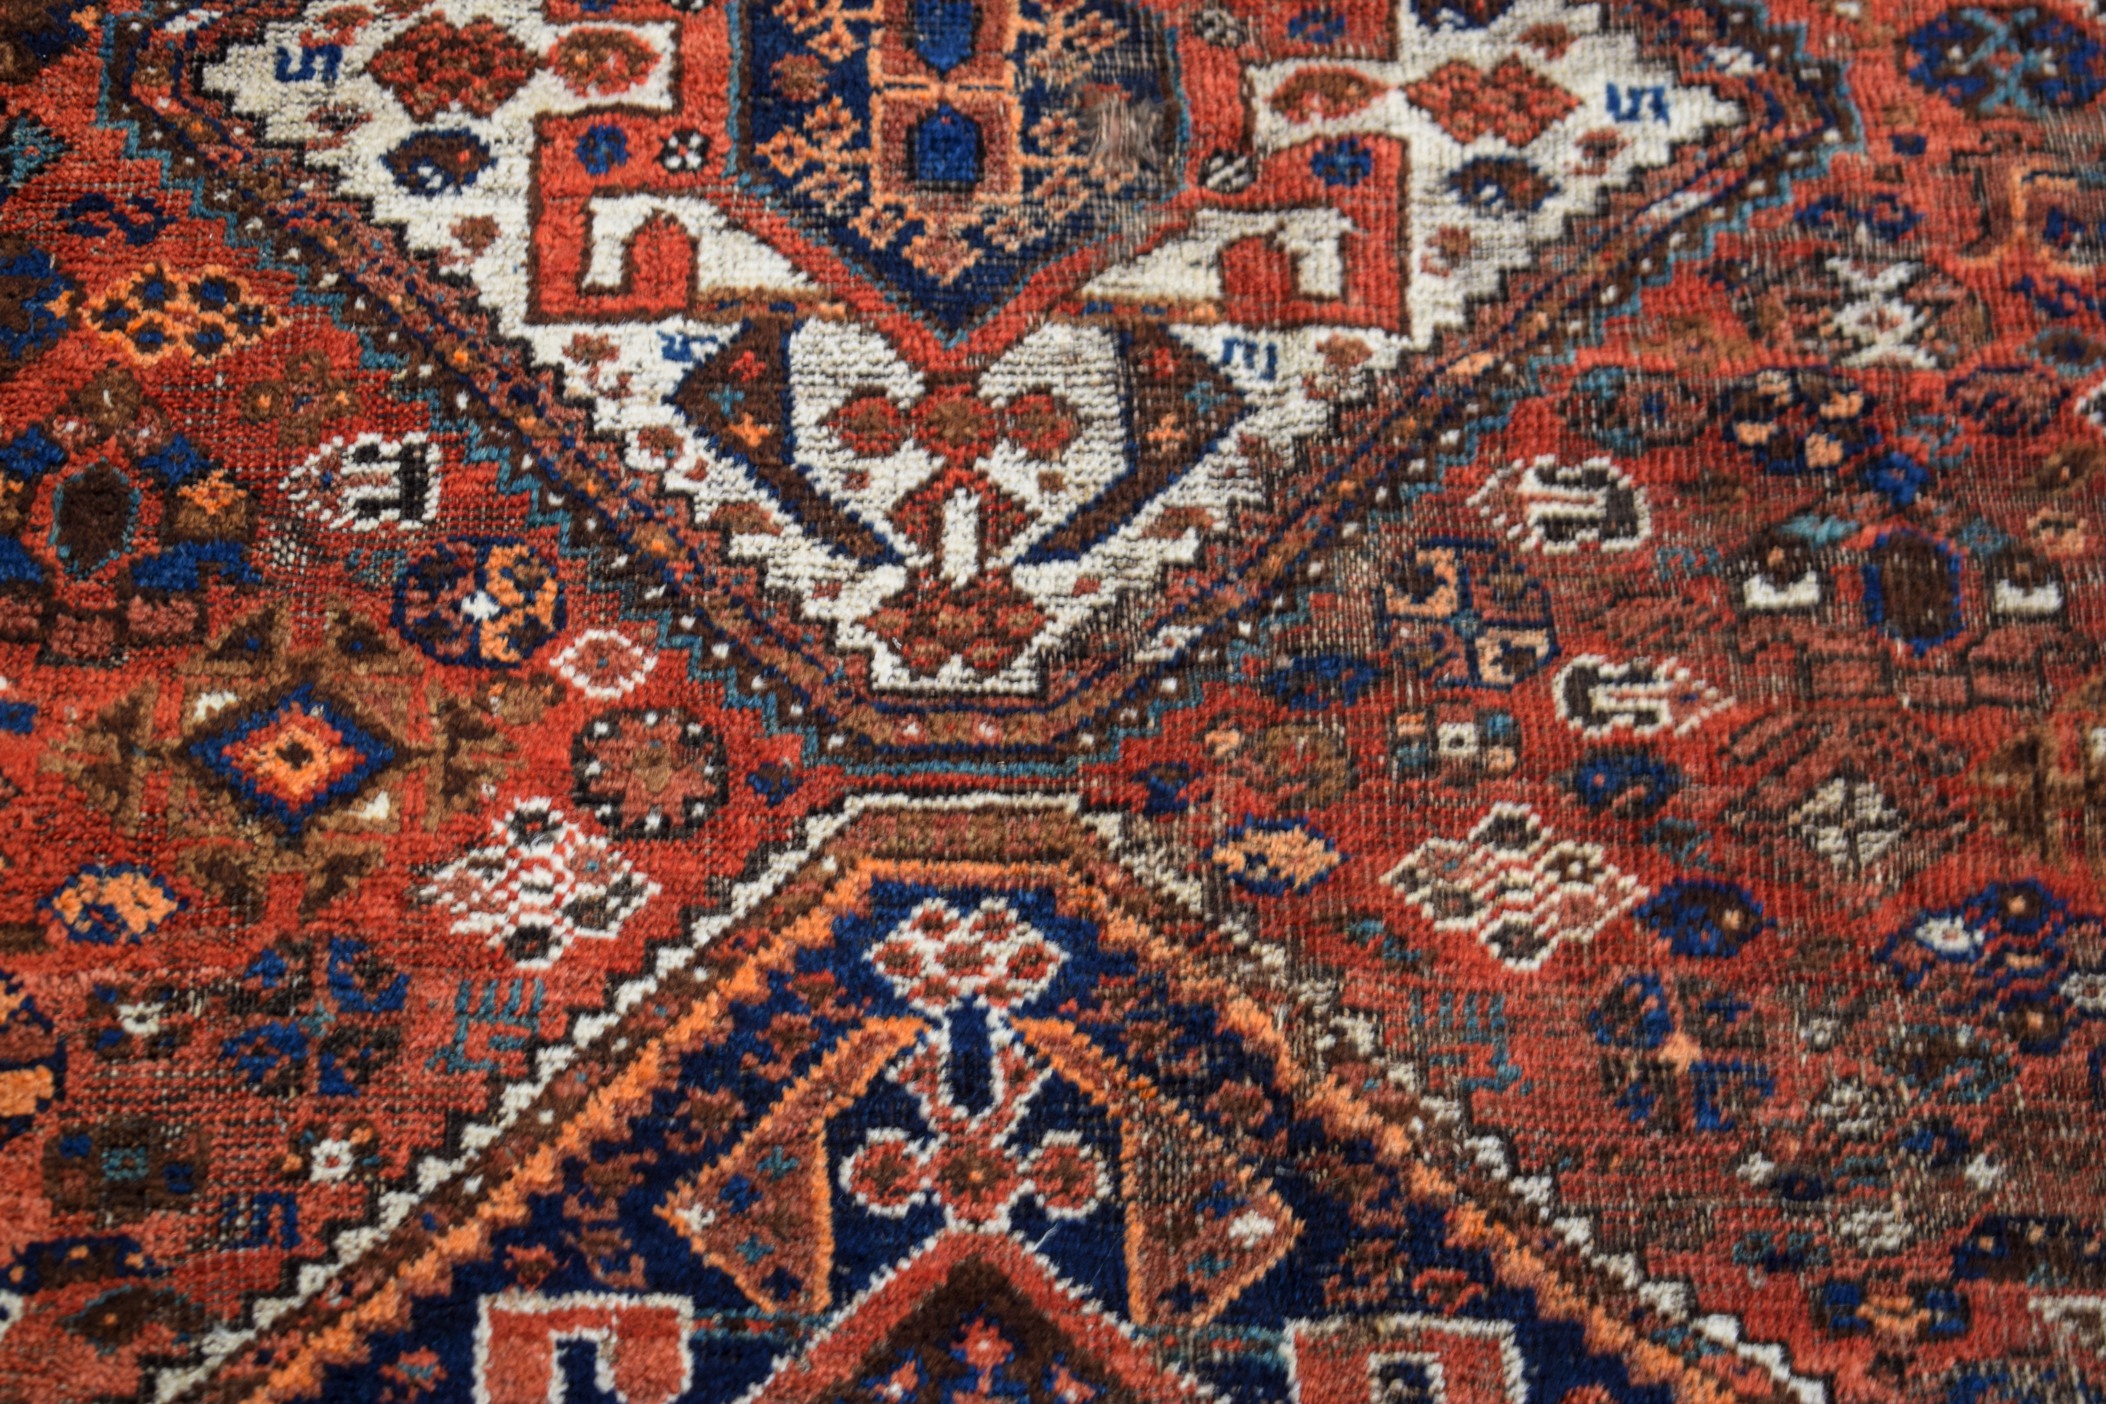 A BLUE GROUND PERSIAN RUG, decorated with symbols and motifs. 247 cm x 169 cm. - Image 2 of 4